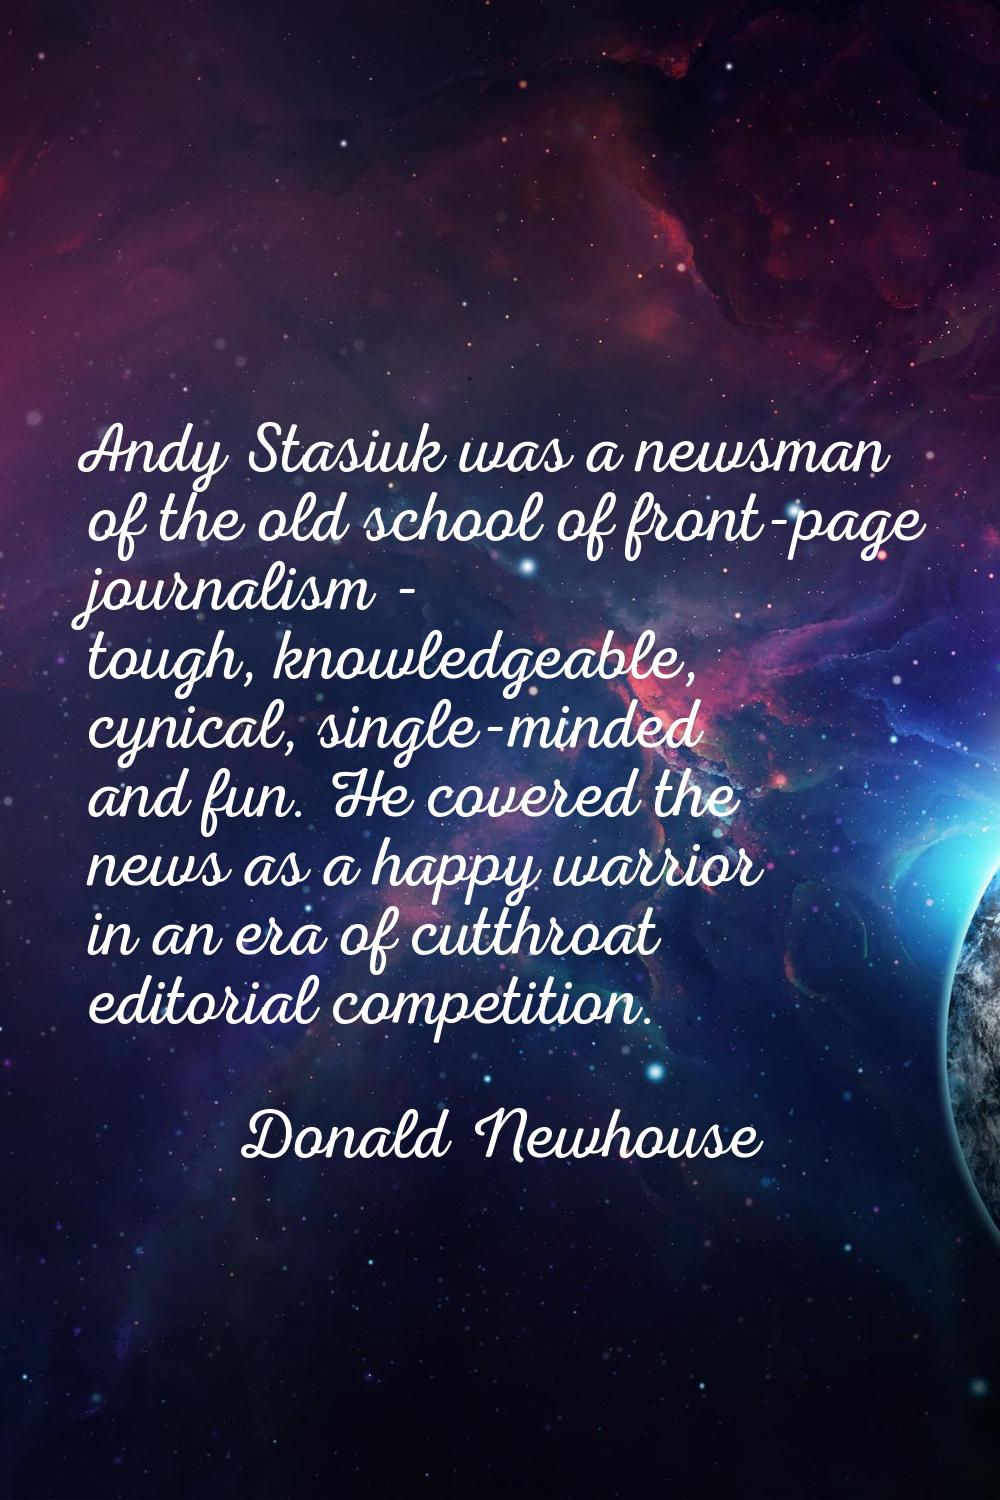 Andy Stasiuk was a newsman of the old school of front-page journalism - tough, knowledgeable, cynic